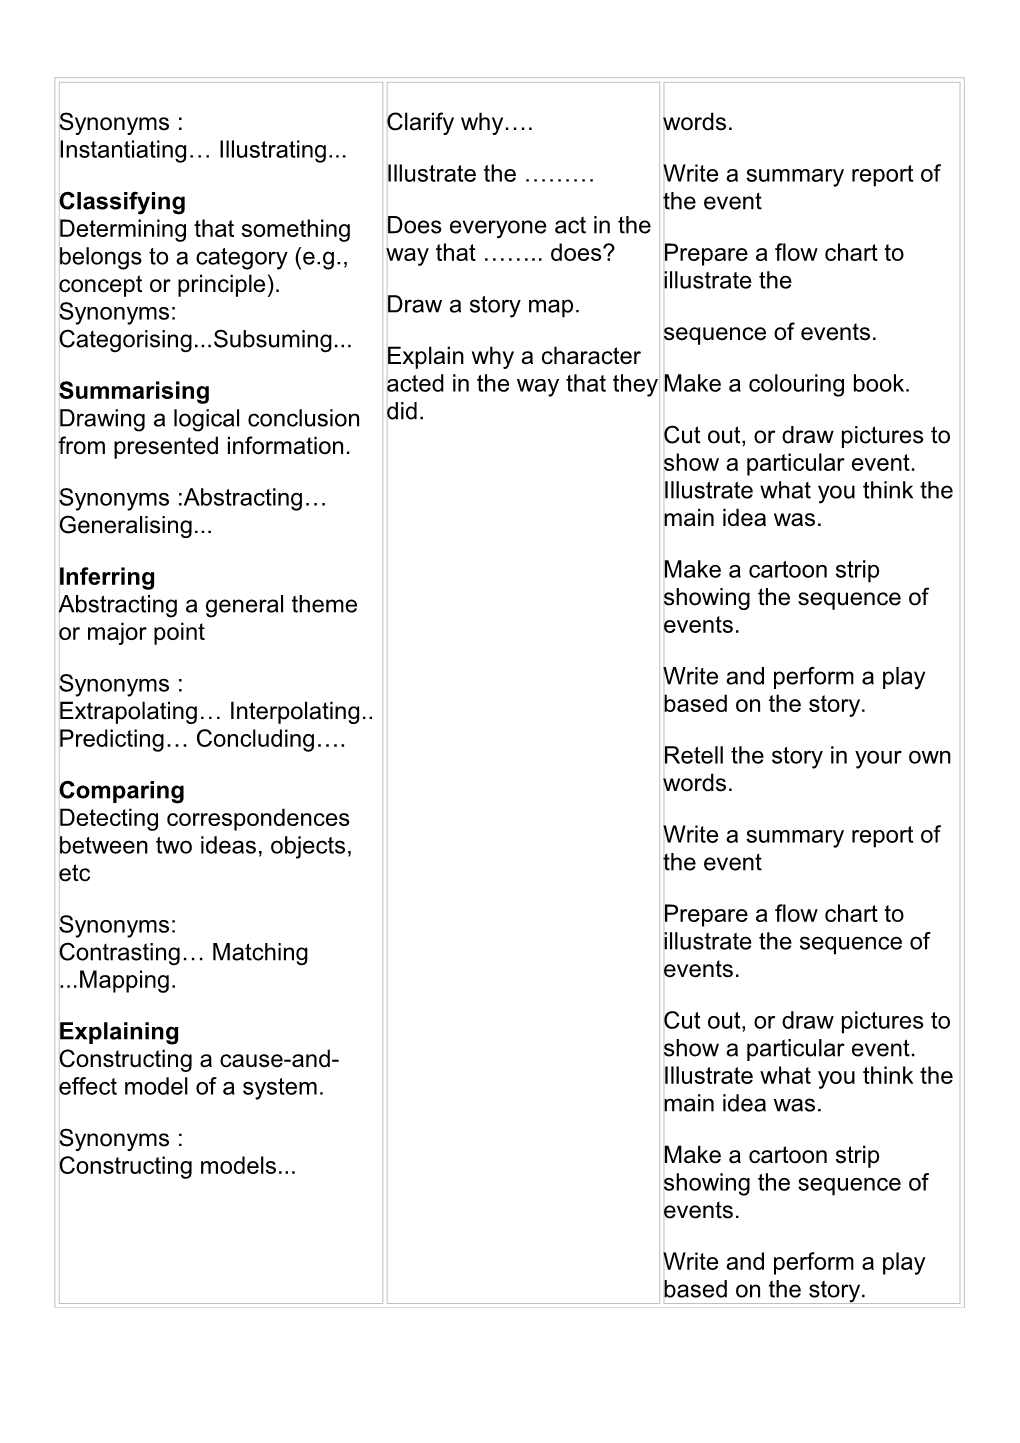 Question Starters And Activity Suggestions Using Bloom’S Taxonomy